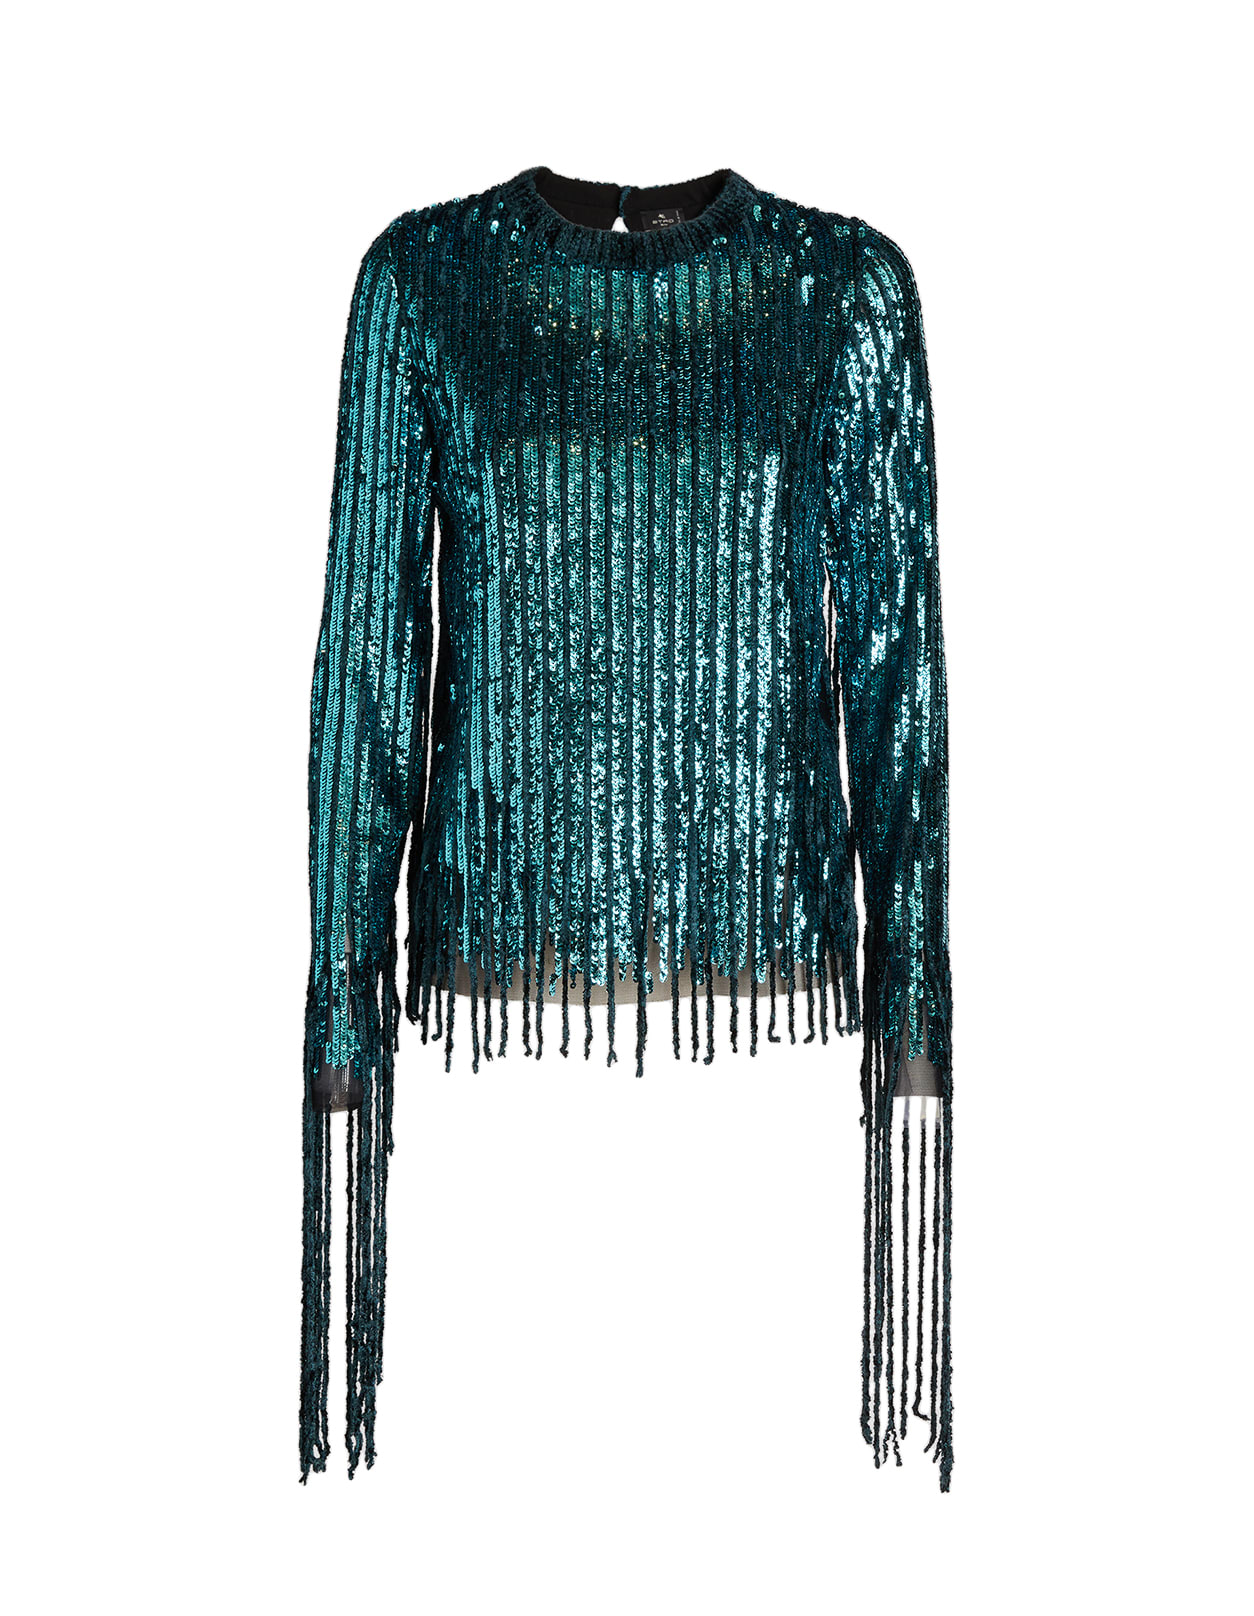 Etro Woman Top In Green Sequins With Fringes